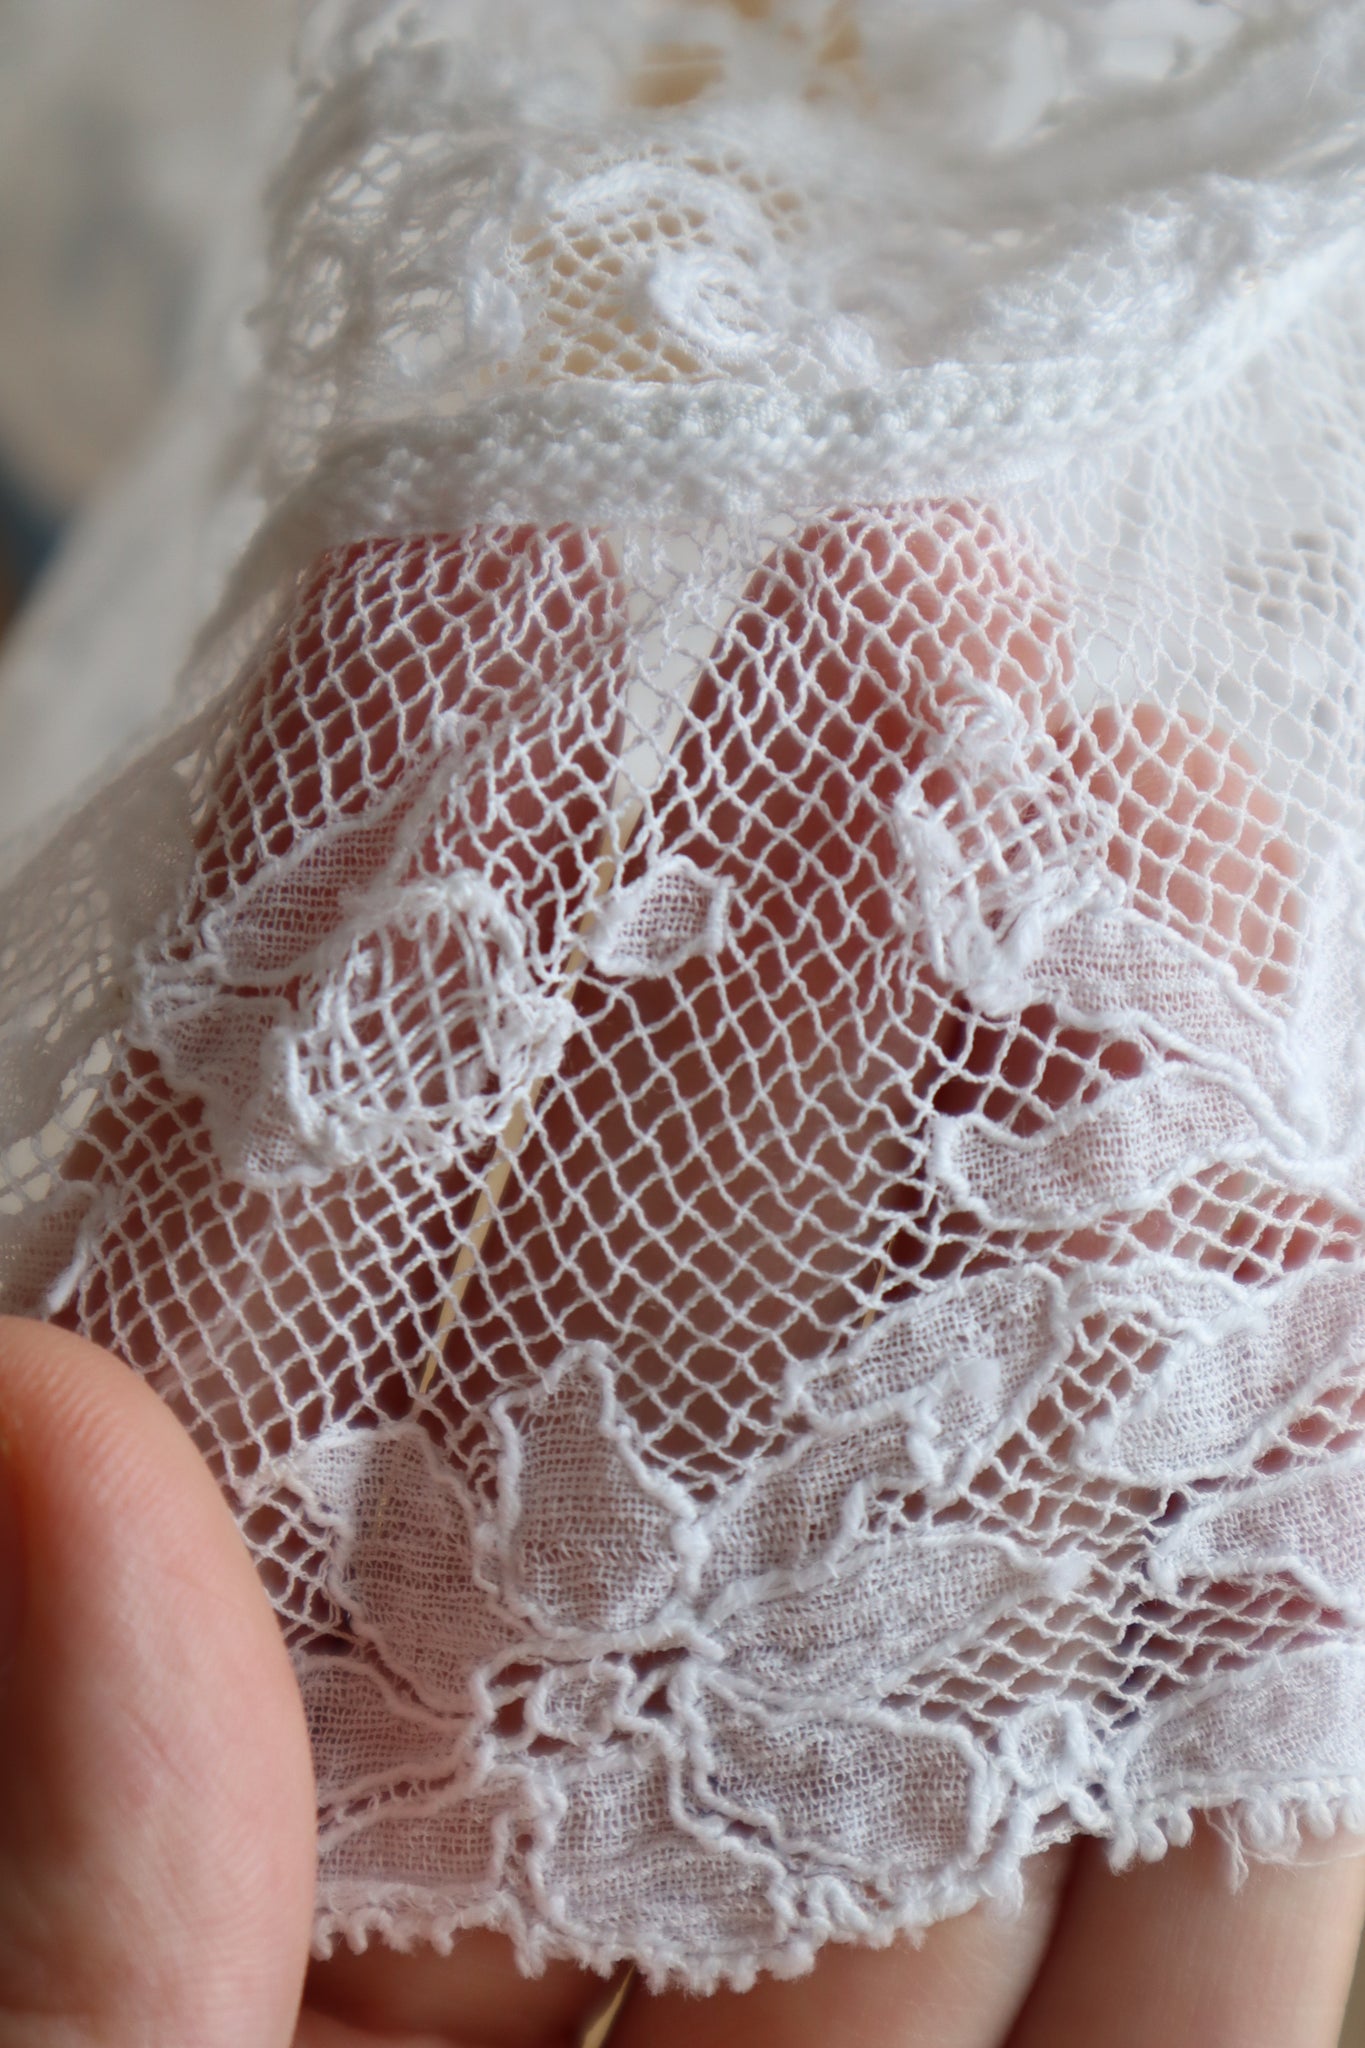 1900s Hand Made Lace Lovely Skirt